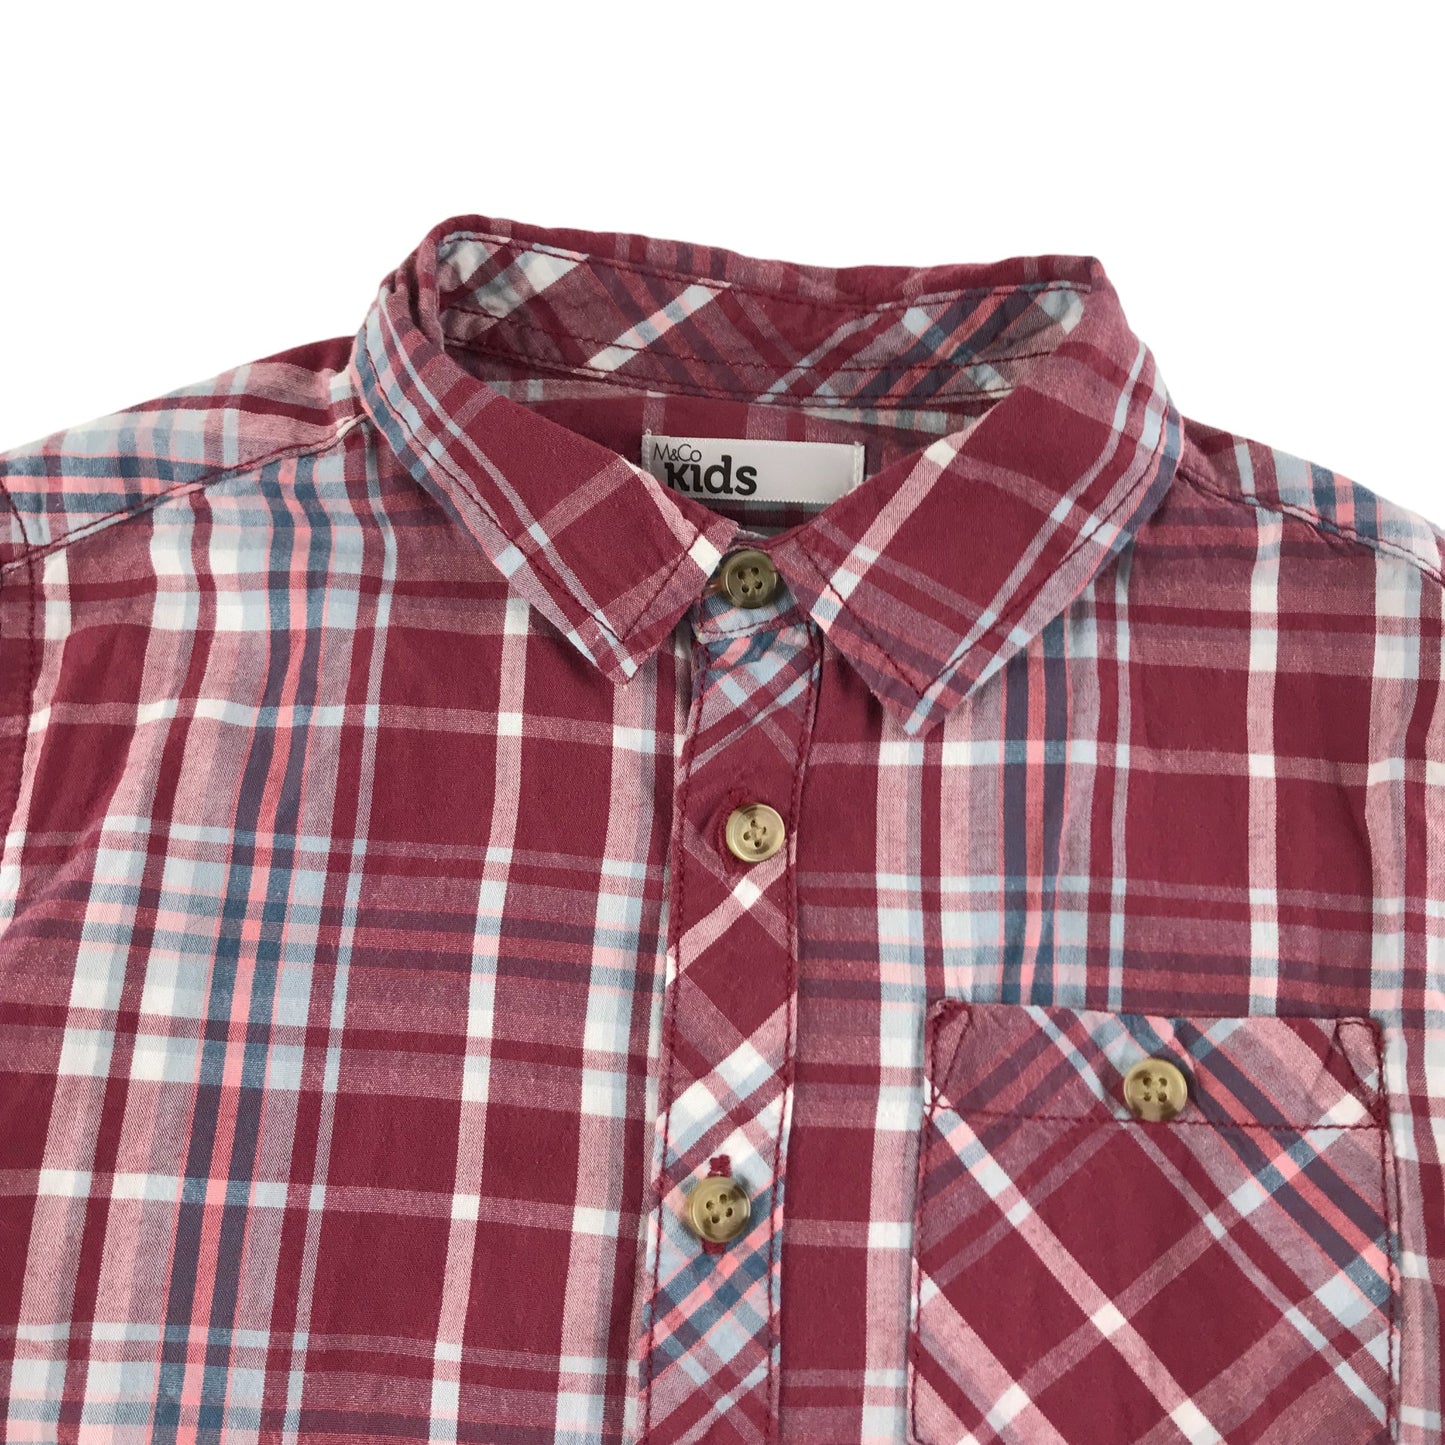 M&Co Shirt Age 5 Red Checked Long Sleeve Button Up Cotton